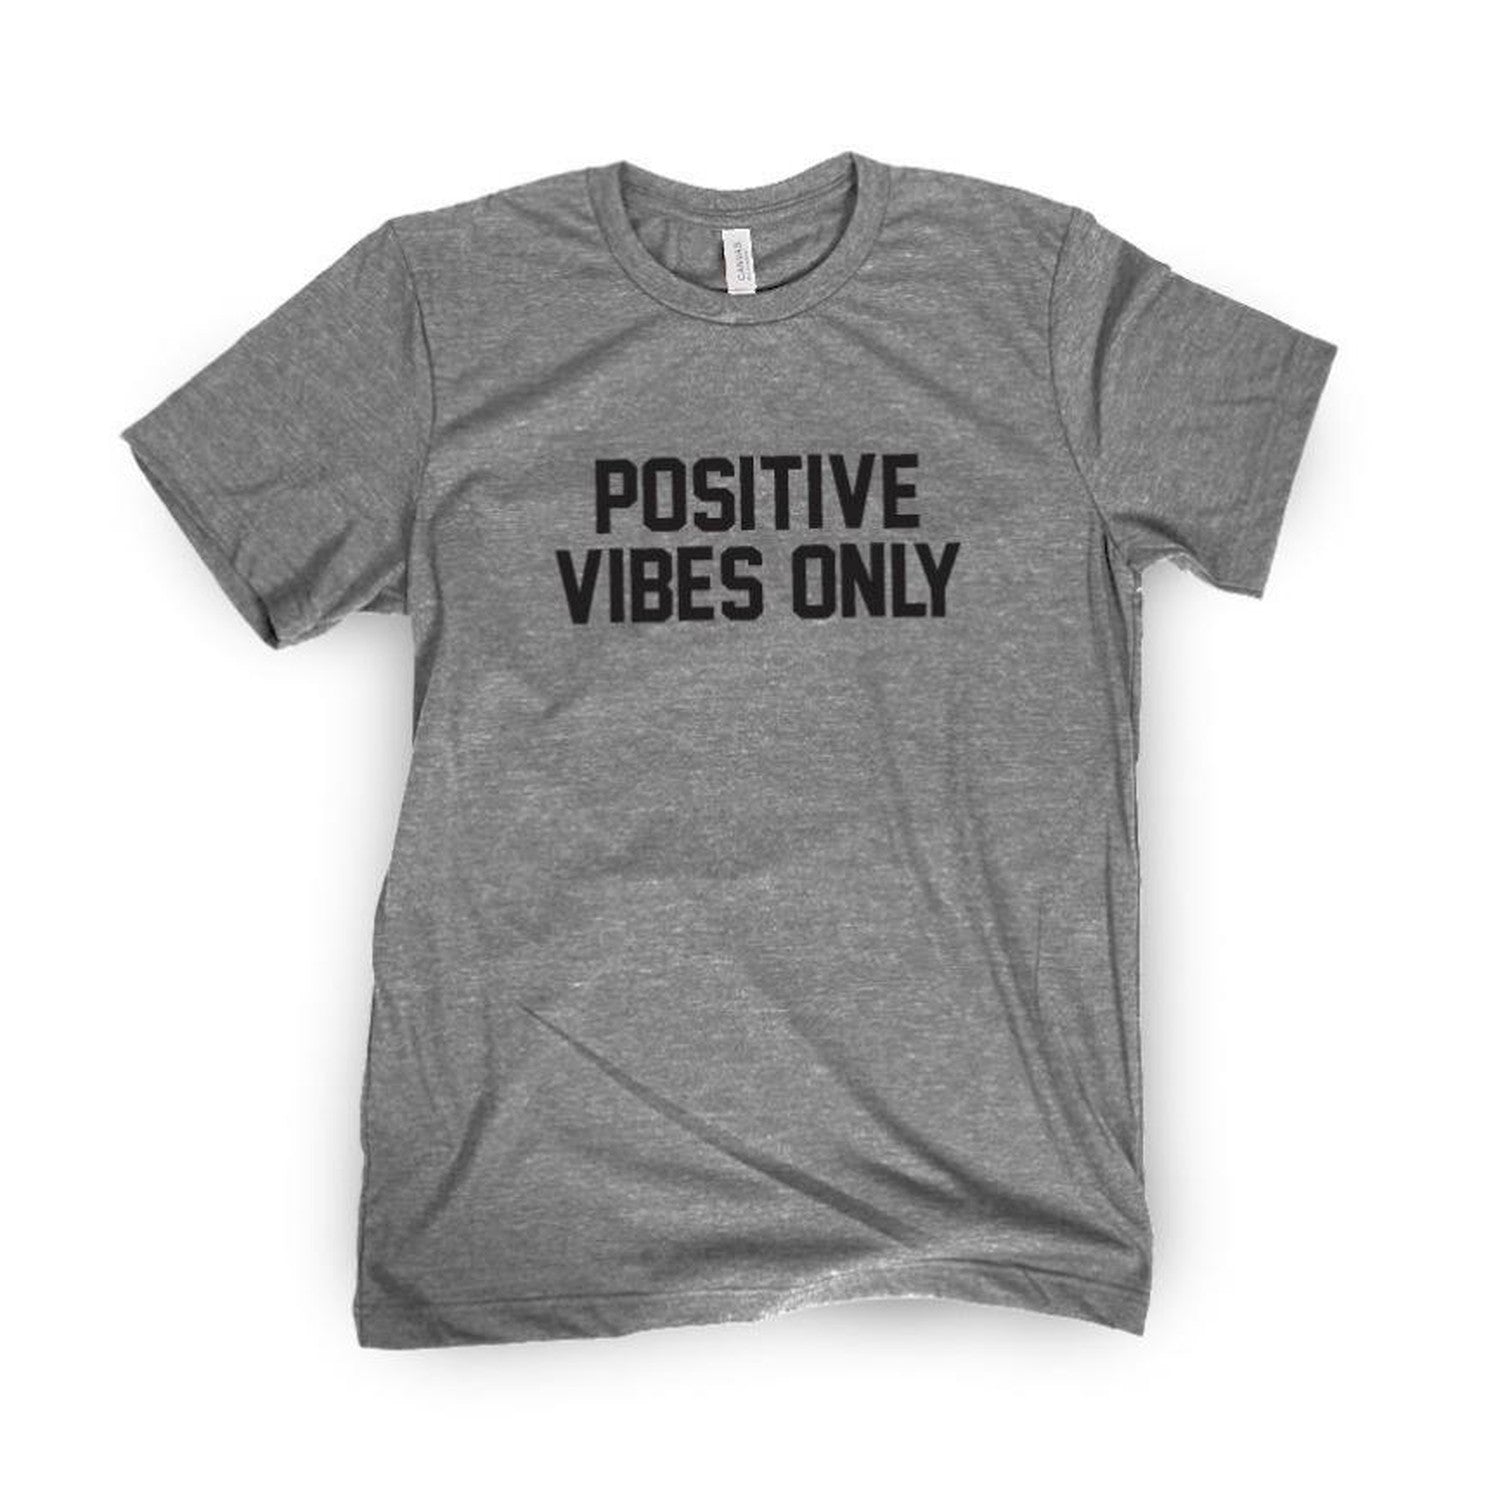 Positive Vibes Only Tee - Barstool Sports Clothing & Merch